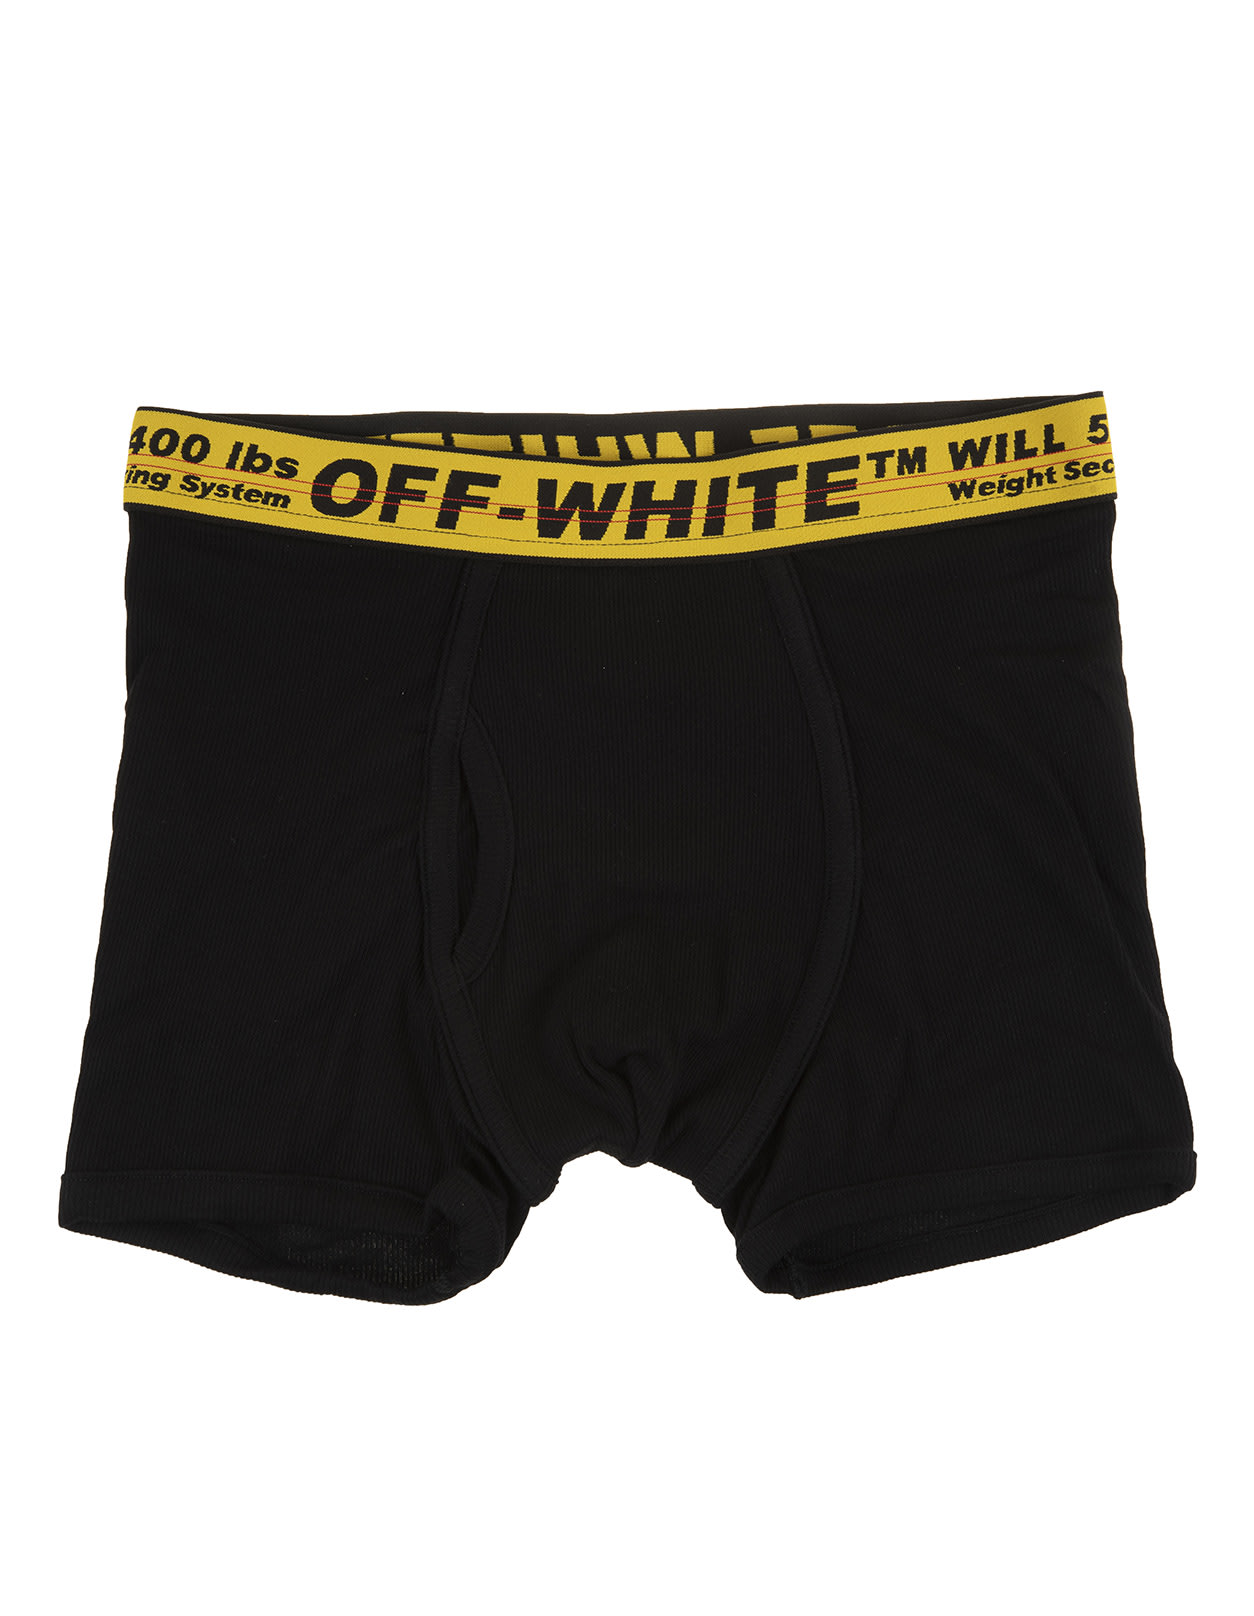 OFF-WHITE BLACK BOXER WITH YELLOW INDUSTRIAL TAPE,11868557